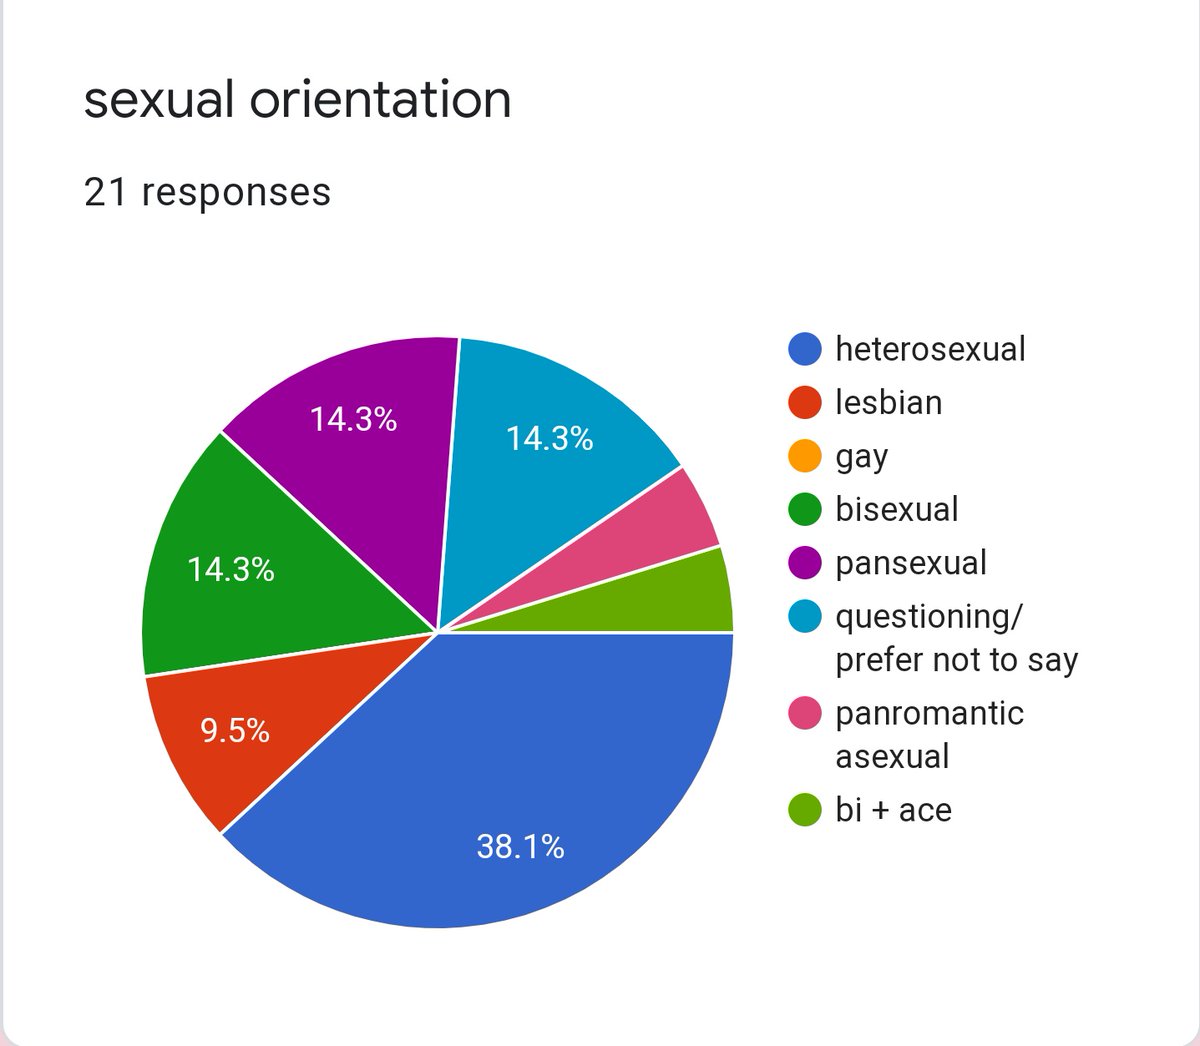 THE MEMBER WITH THE MOST HETEROSEXUAL STANS#2 HAJOON heterosexual: 38.1%lesbian: 9.5%gay: 0%bisexual: 14.3%pansexual: 14.3%questioning/prefer not to say: 14.3%other: 9.6%